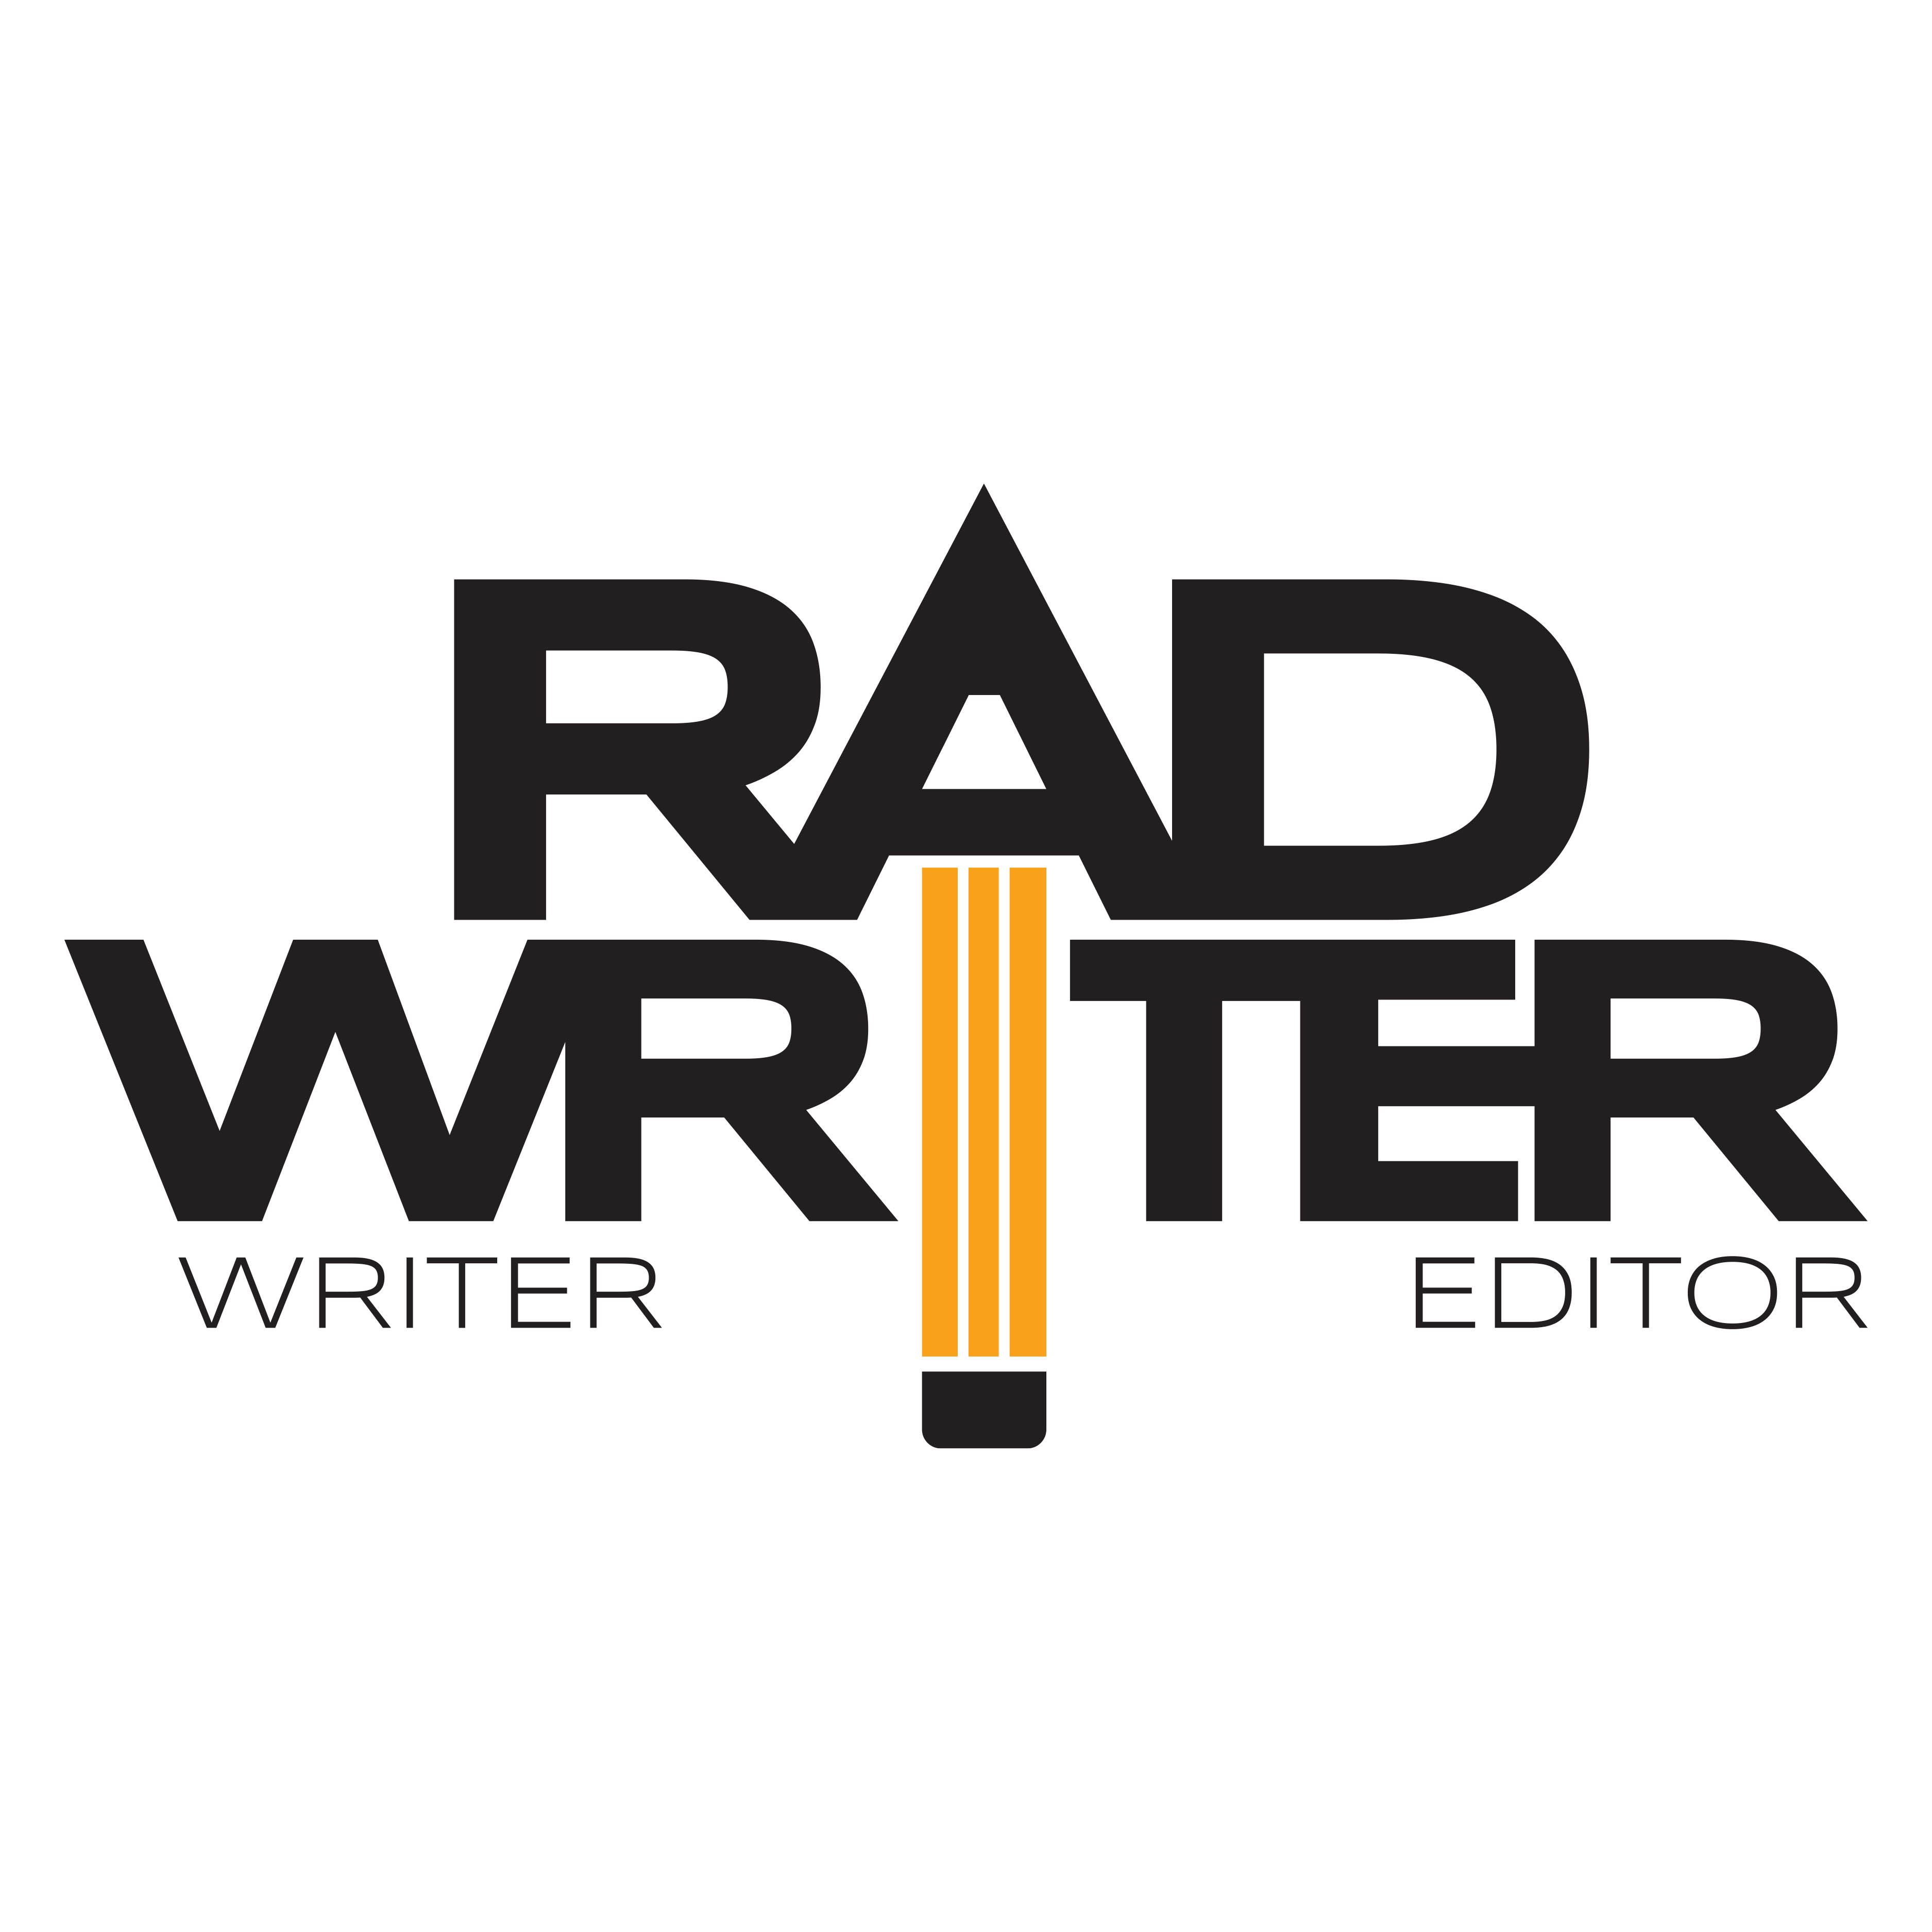 RAD_Writer logo design by logo designer 3 Clever Broads for your inspiration and for the worlds largest logo competition